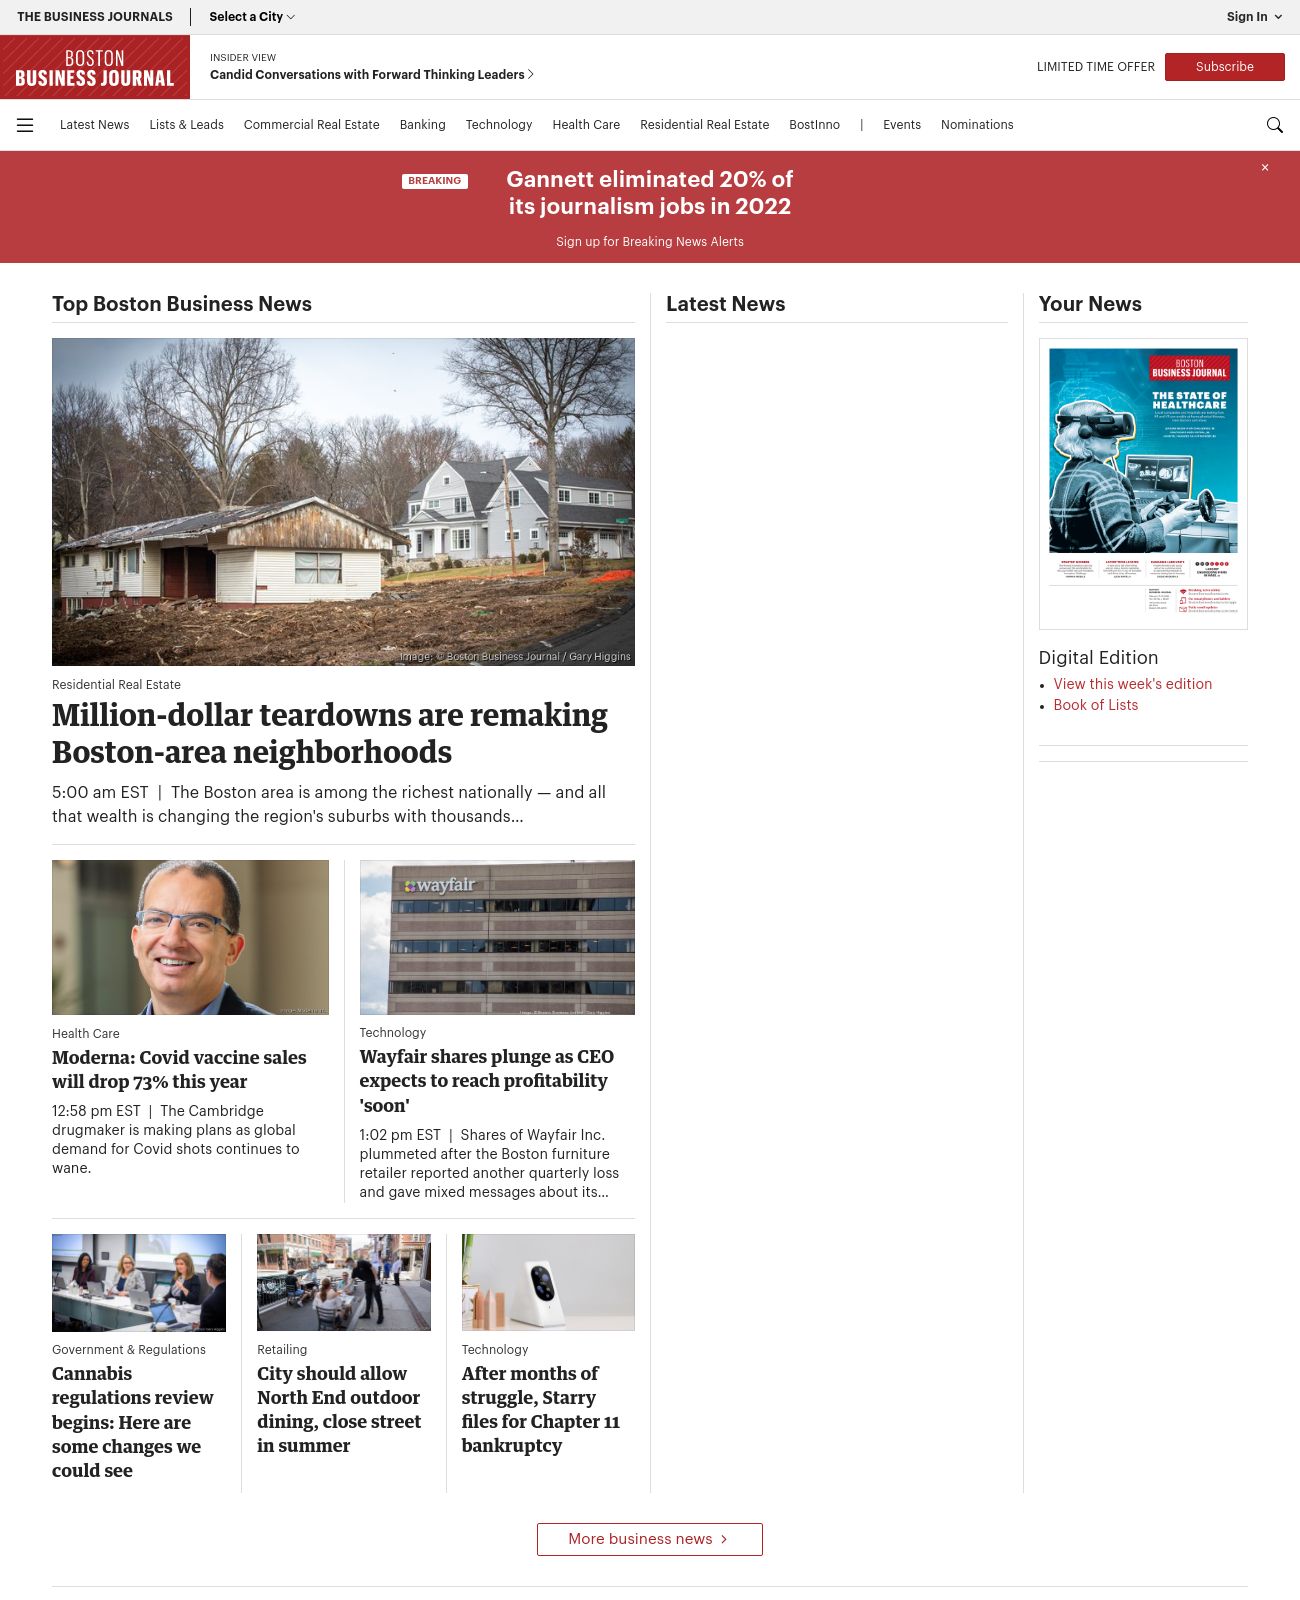 Boston Business Journal at 2023-02-23 19:56:42-05:00 local time